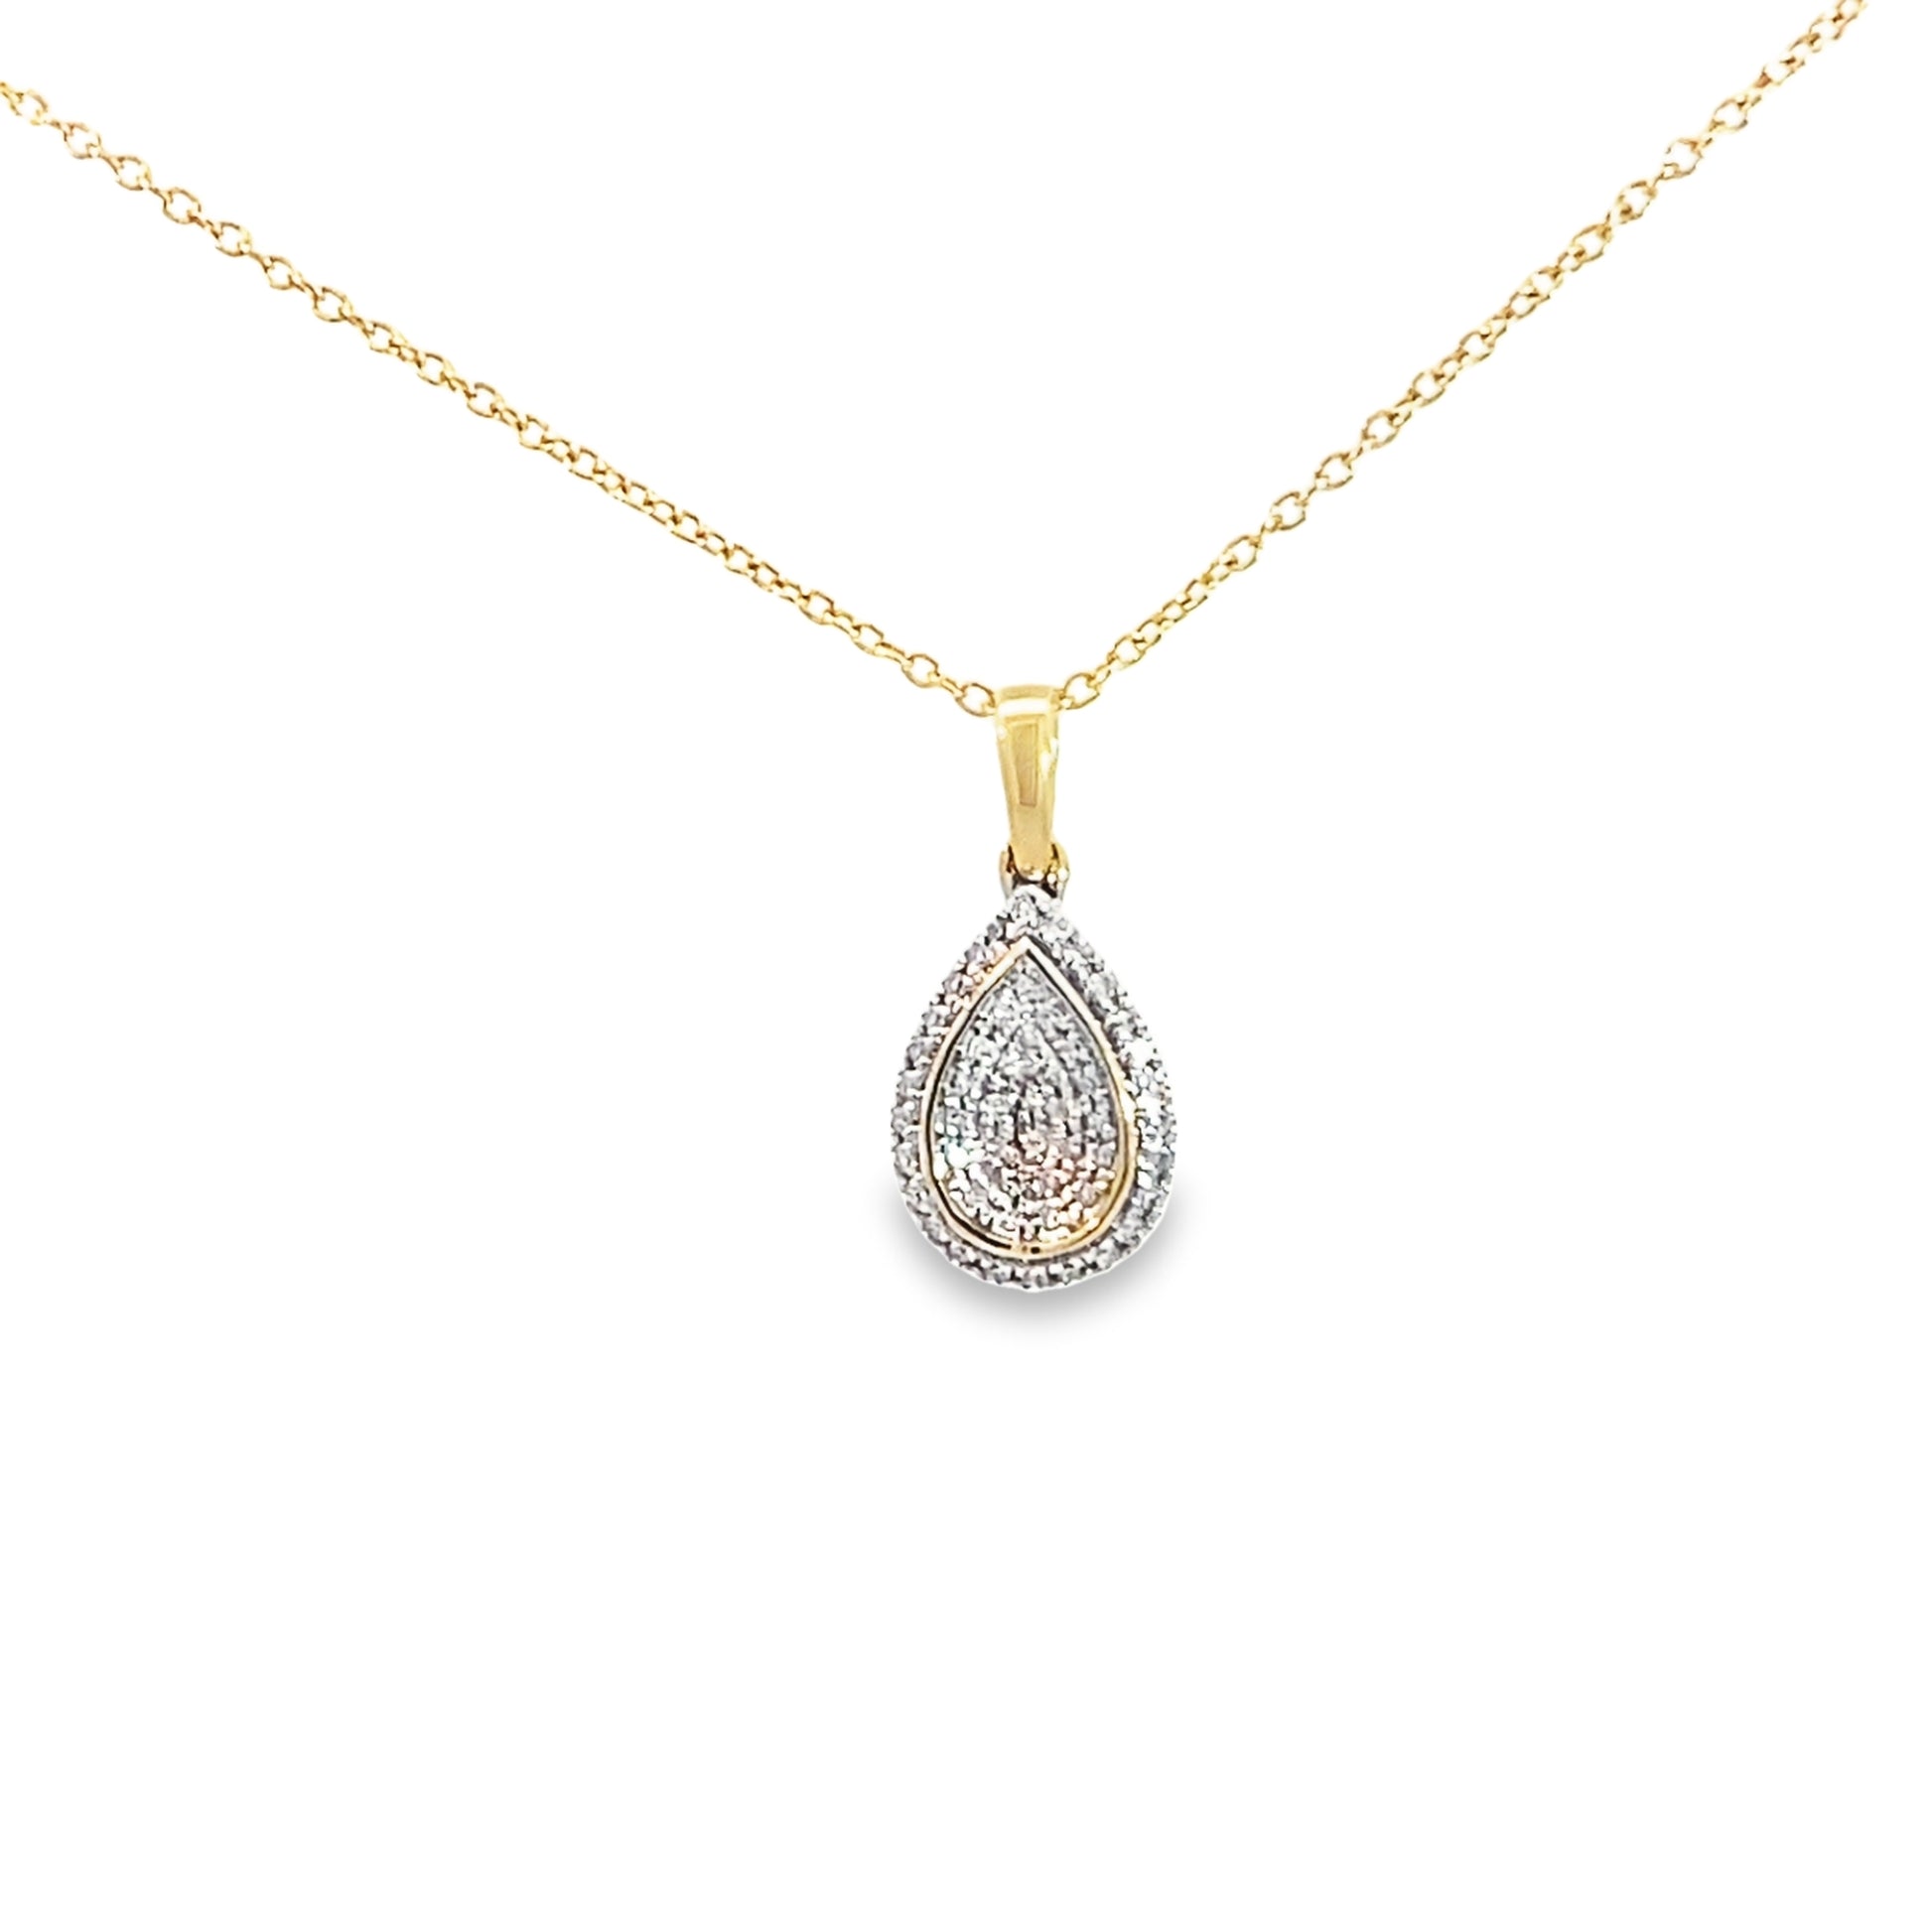 0.15Ctw 10K Yellow Gold Diamond Pear Shaped Pendant Necklace 18in 1.4Dwt